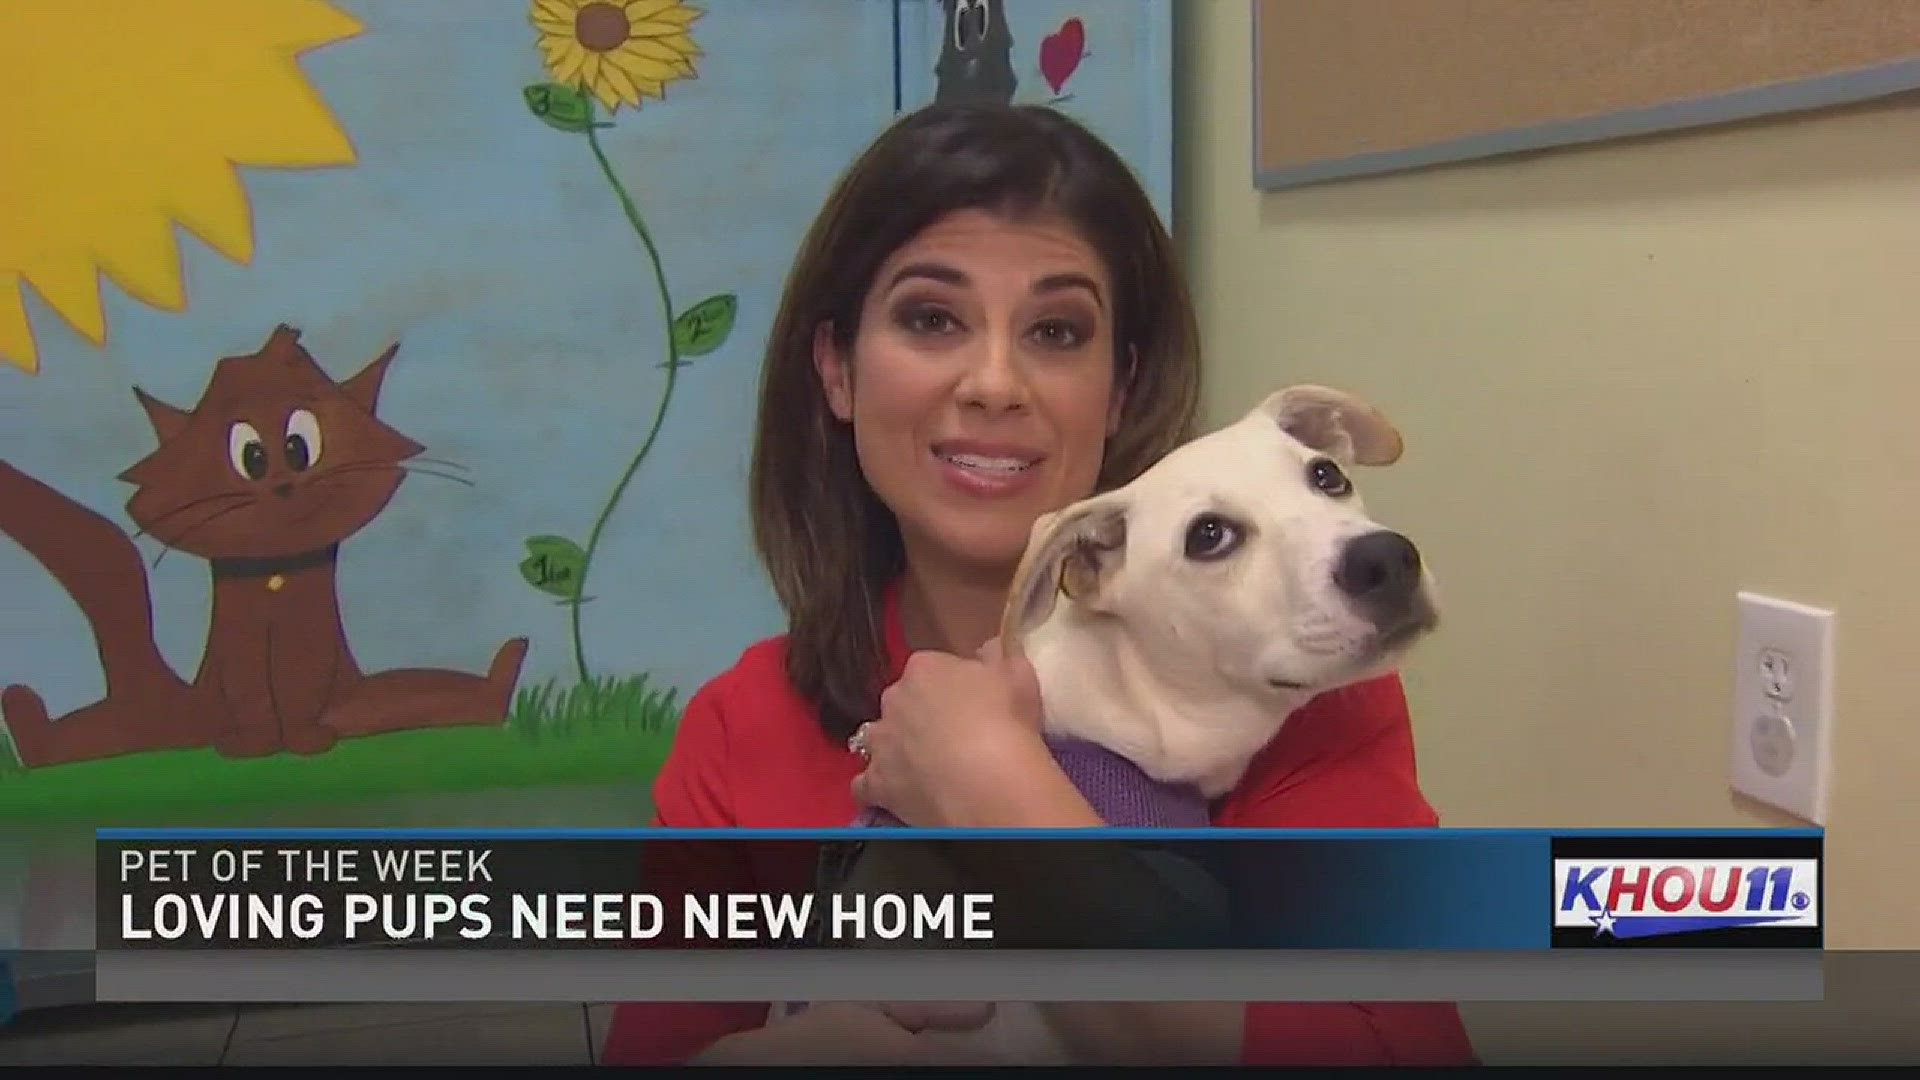 The Harris County Animal Shelter is hoping you can give some loving pups a new home.